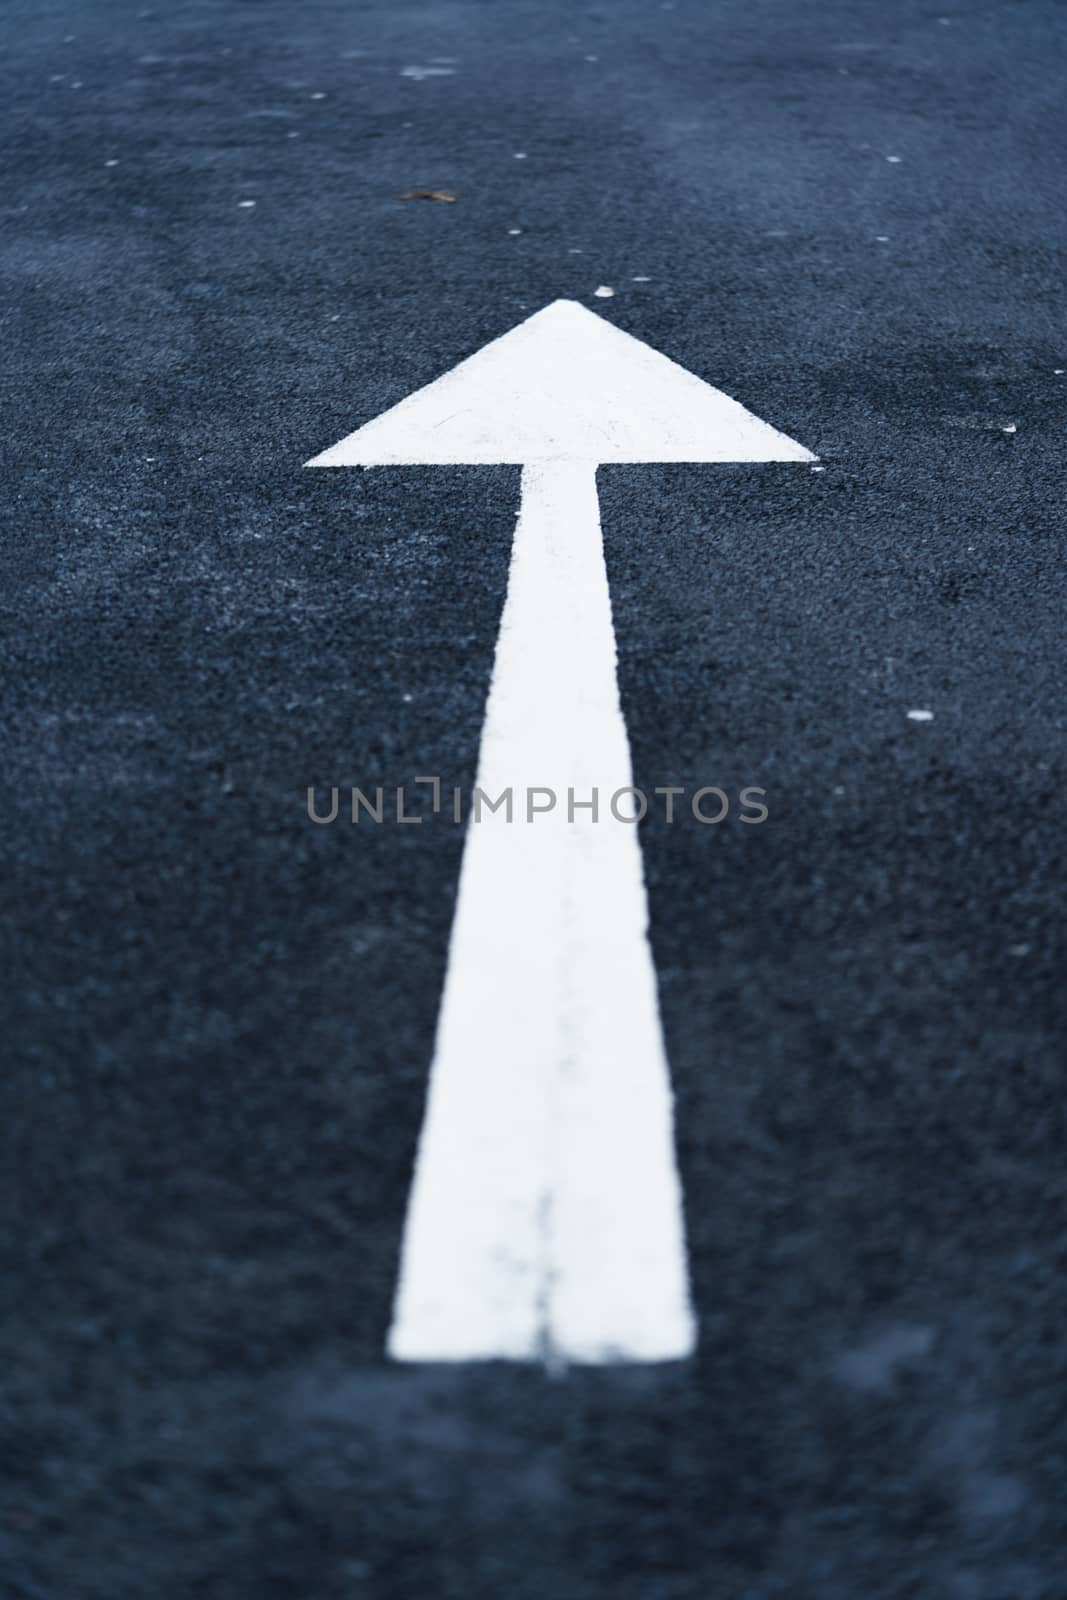 One way road sign by samULvisuals